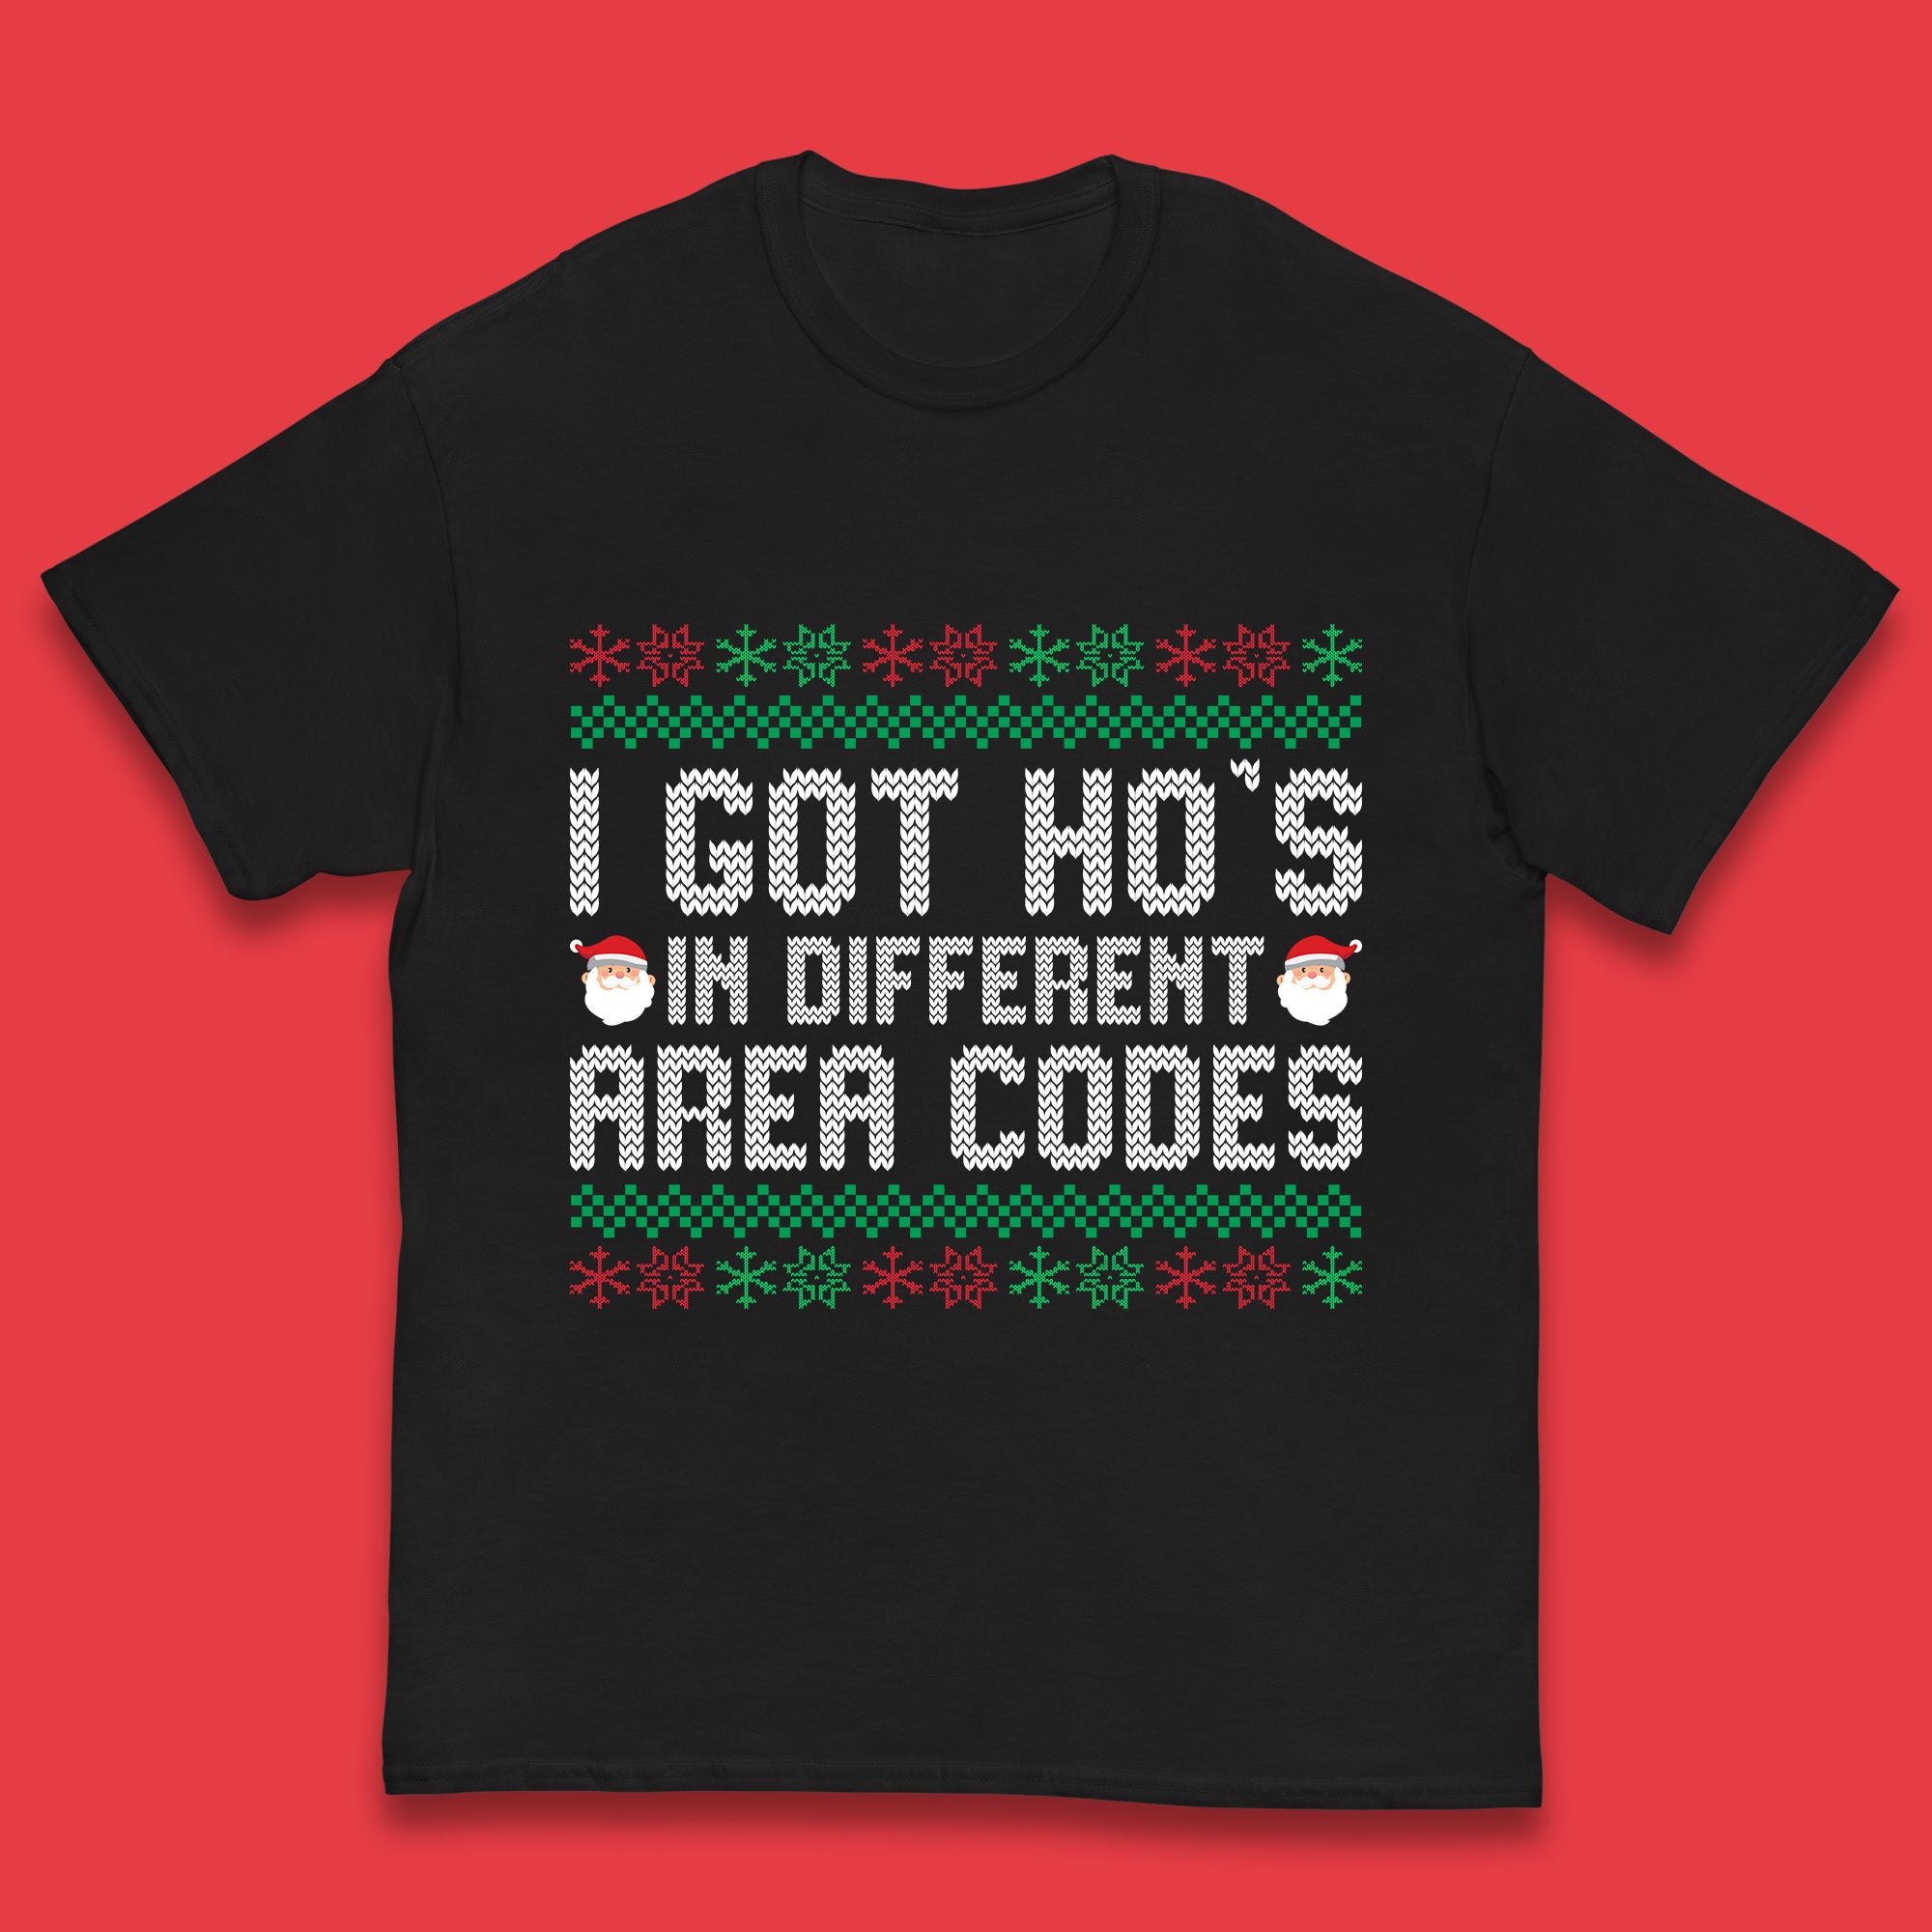 I Got  Ho's in Different Area Codes Christmas Santa Claus Funny Ugly Xmas Kids T Shirt